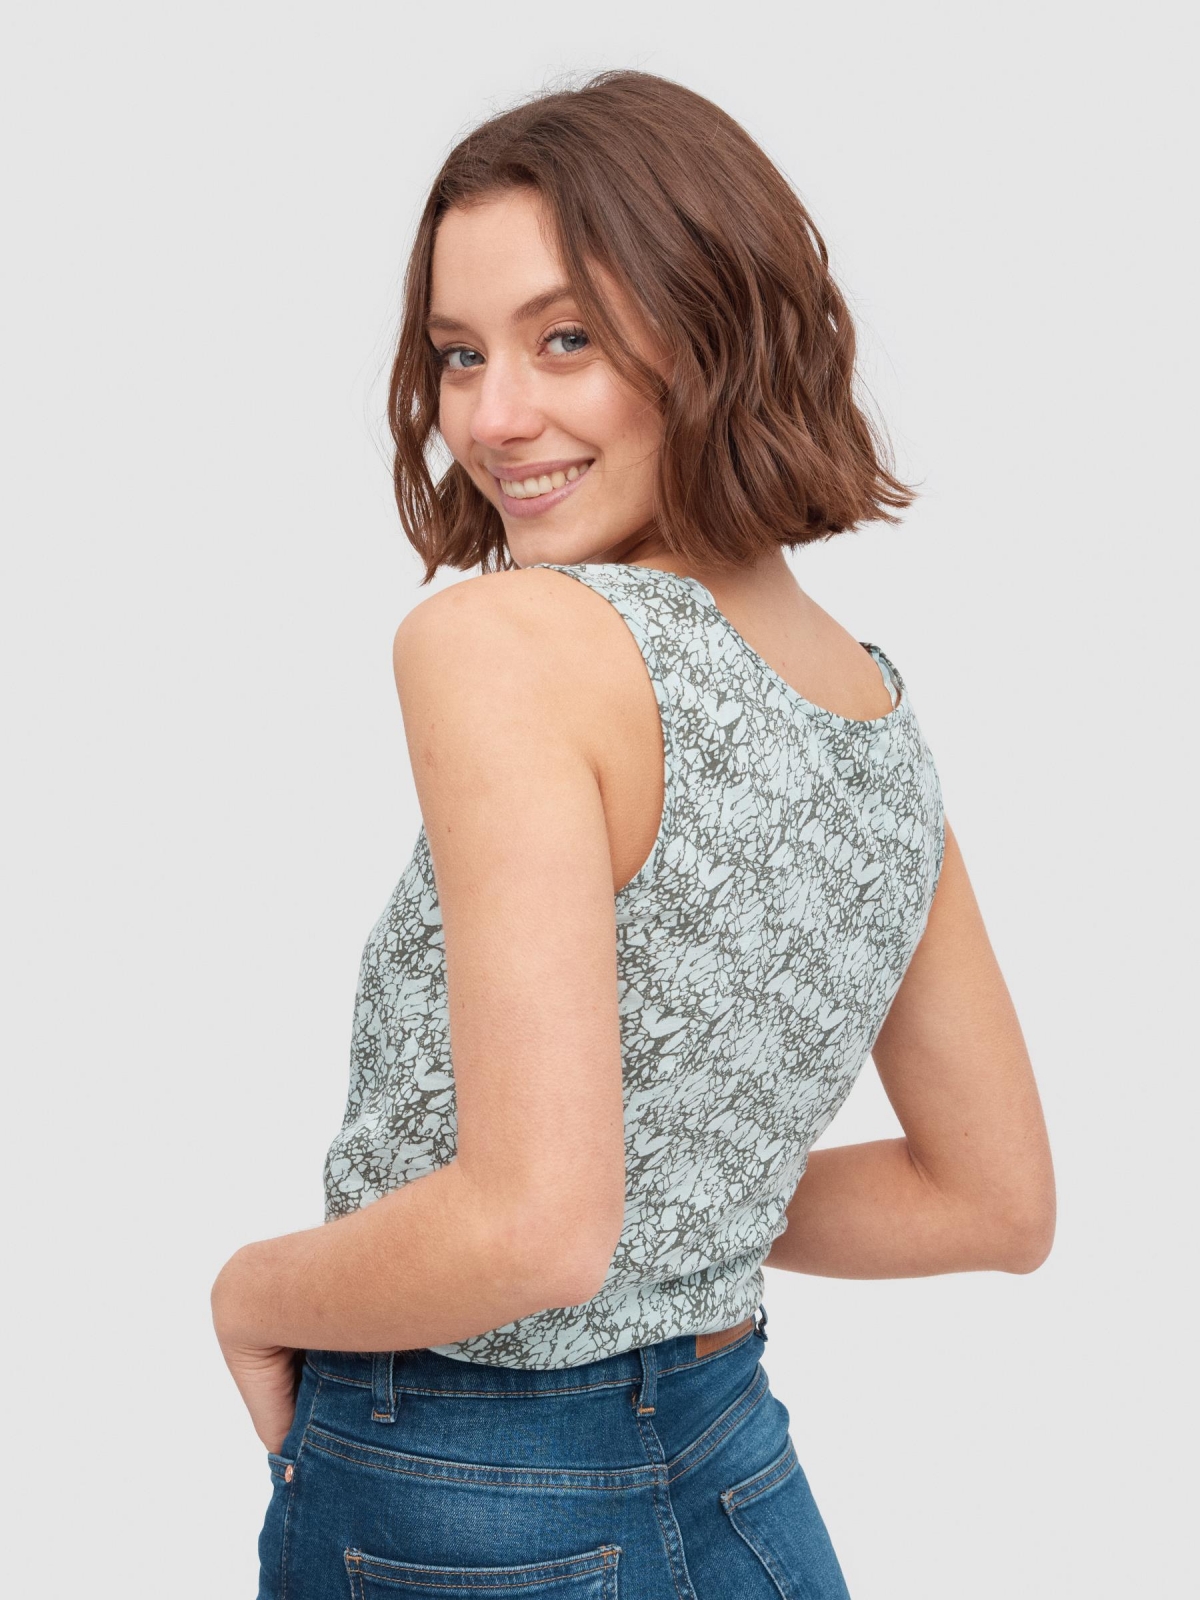 Animal print knotted t-shirt teal middle back view